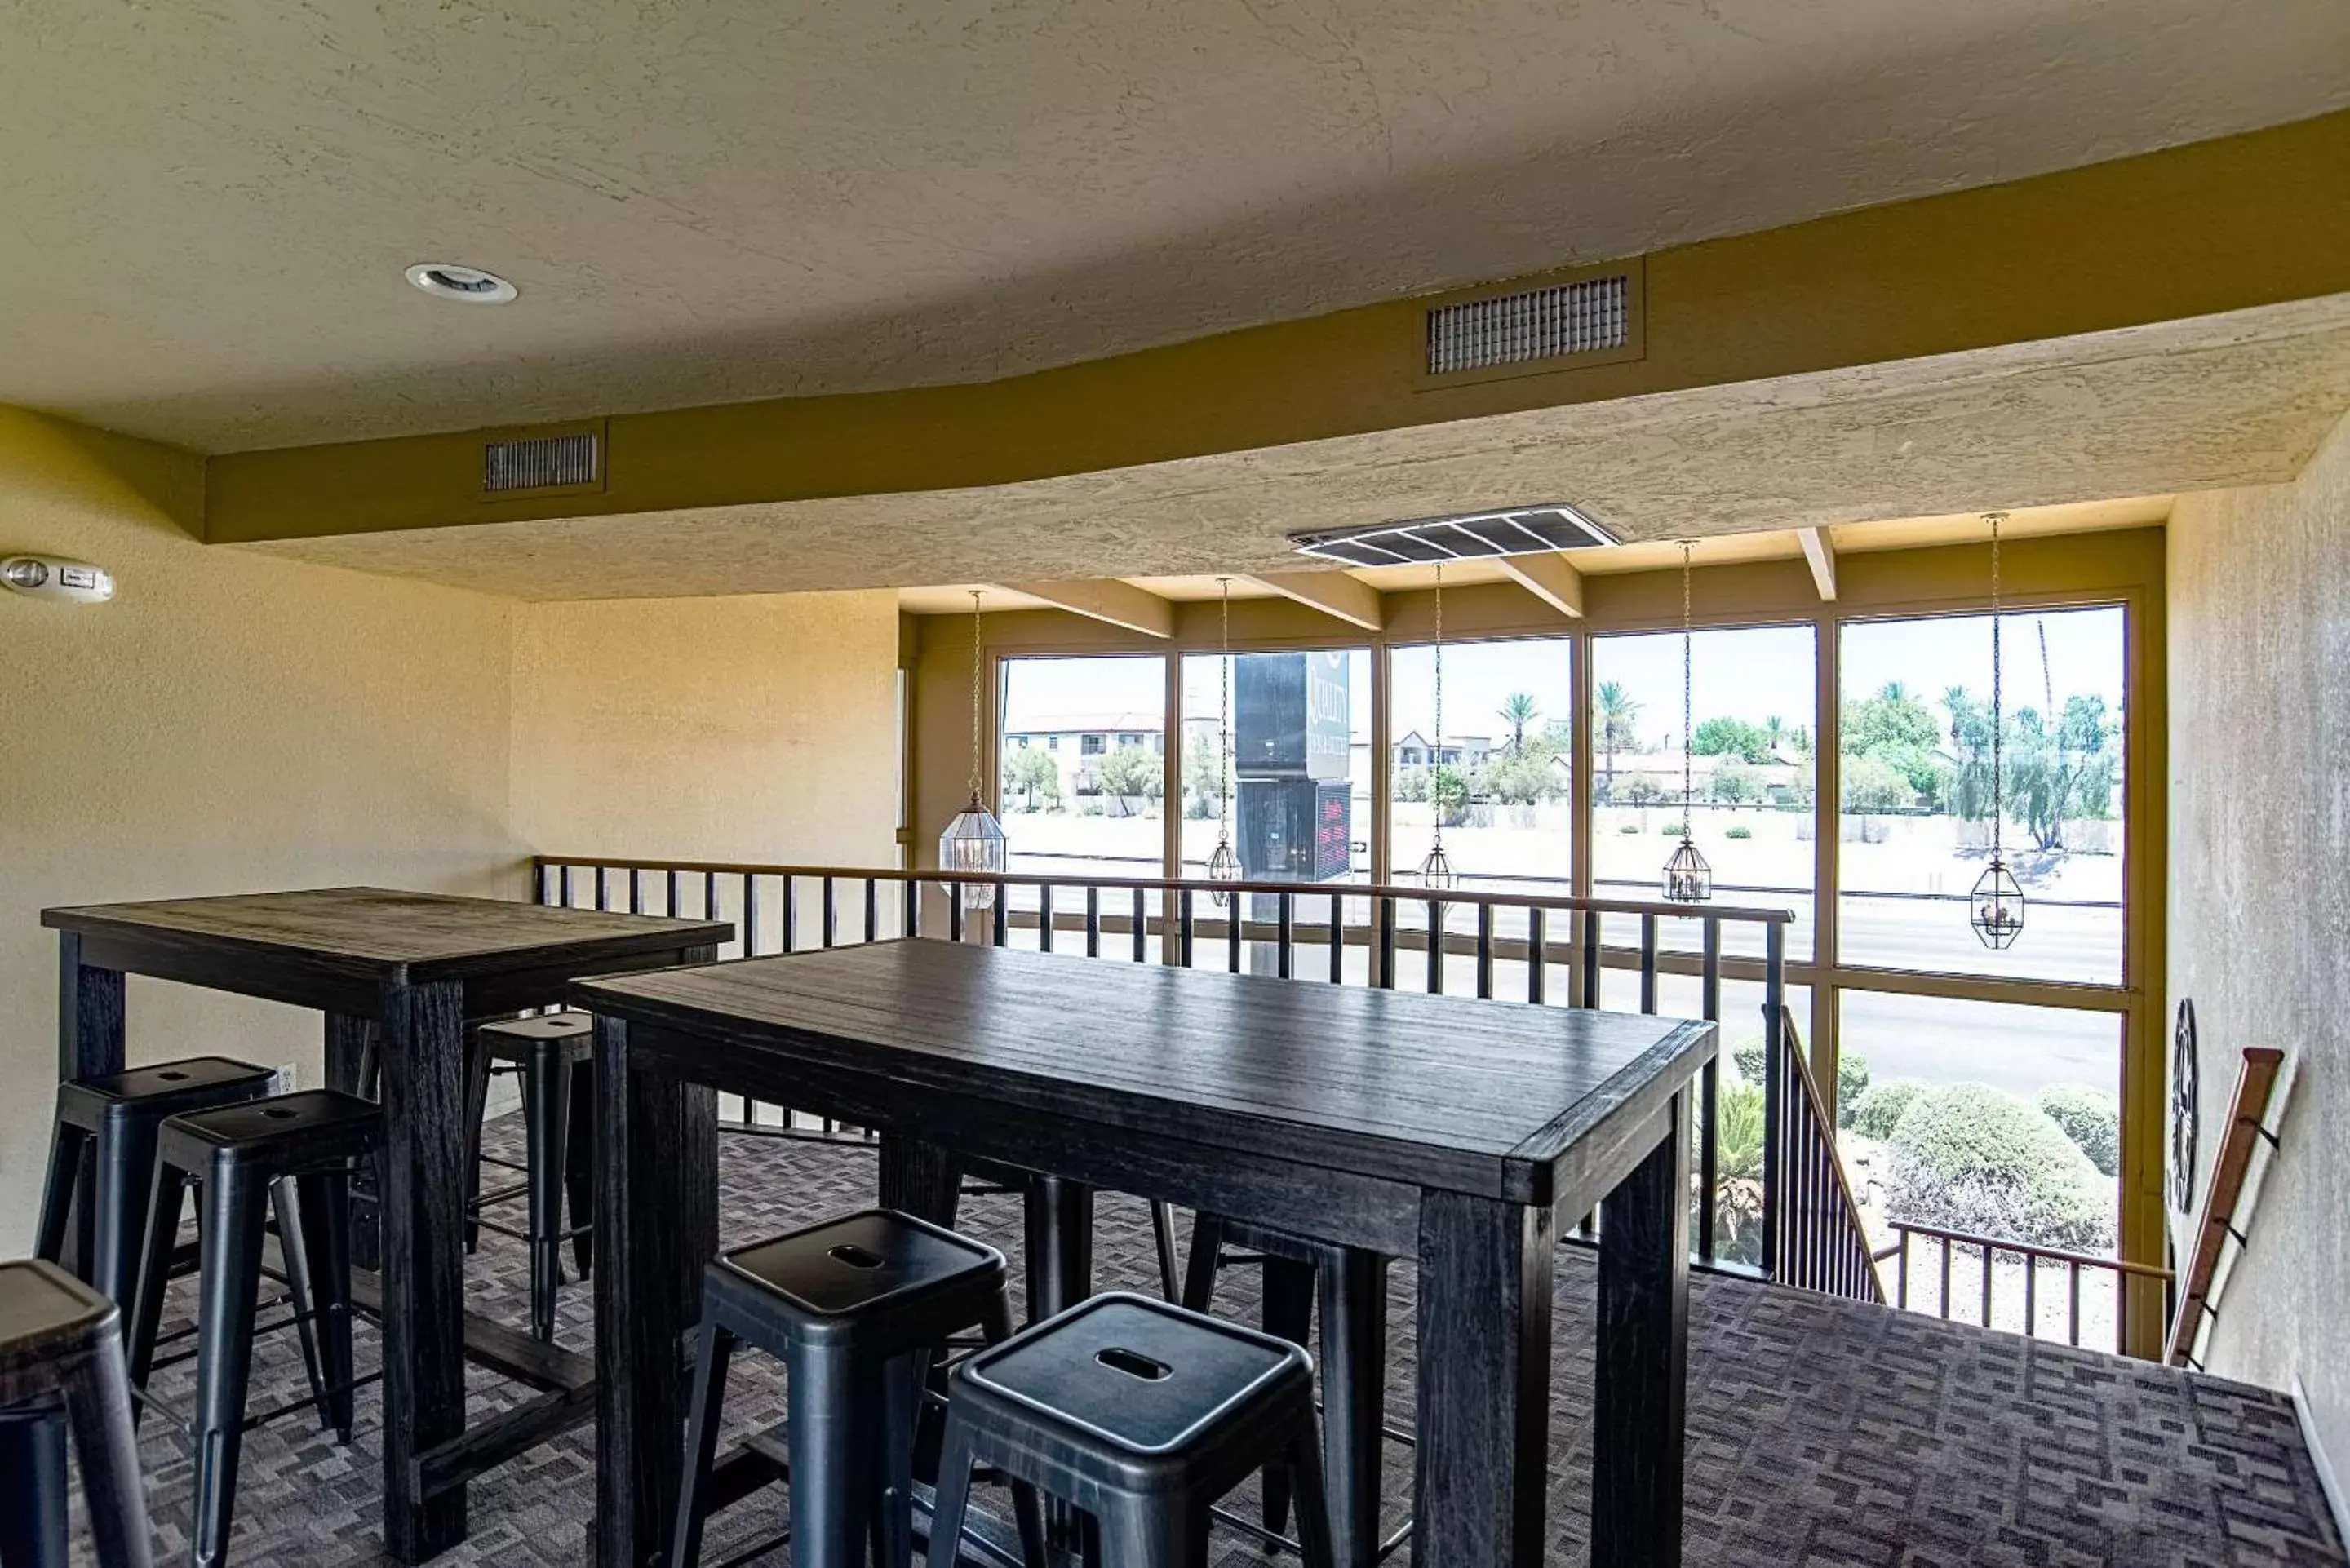 Lobby or reception in Quality Inn & Suites Phoenix NW - Sun City